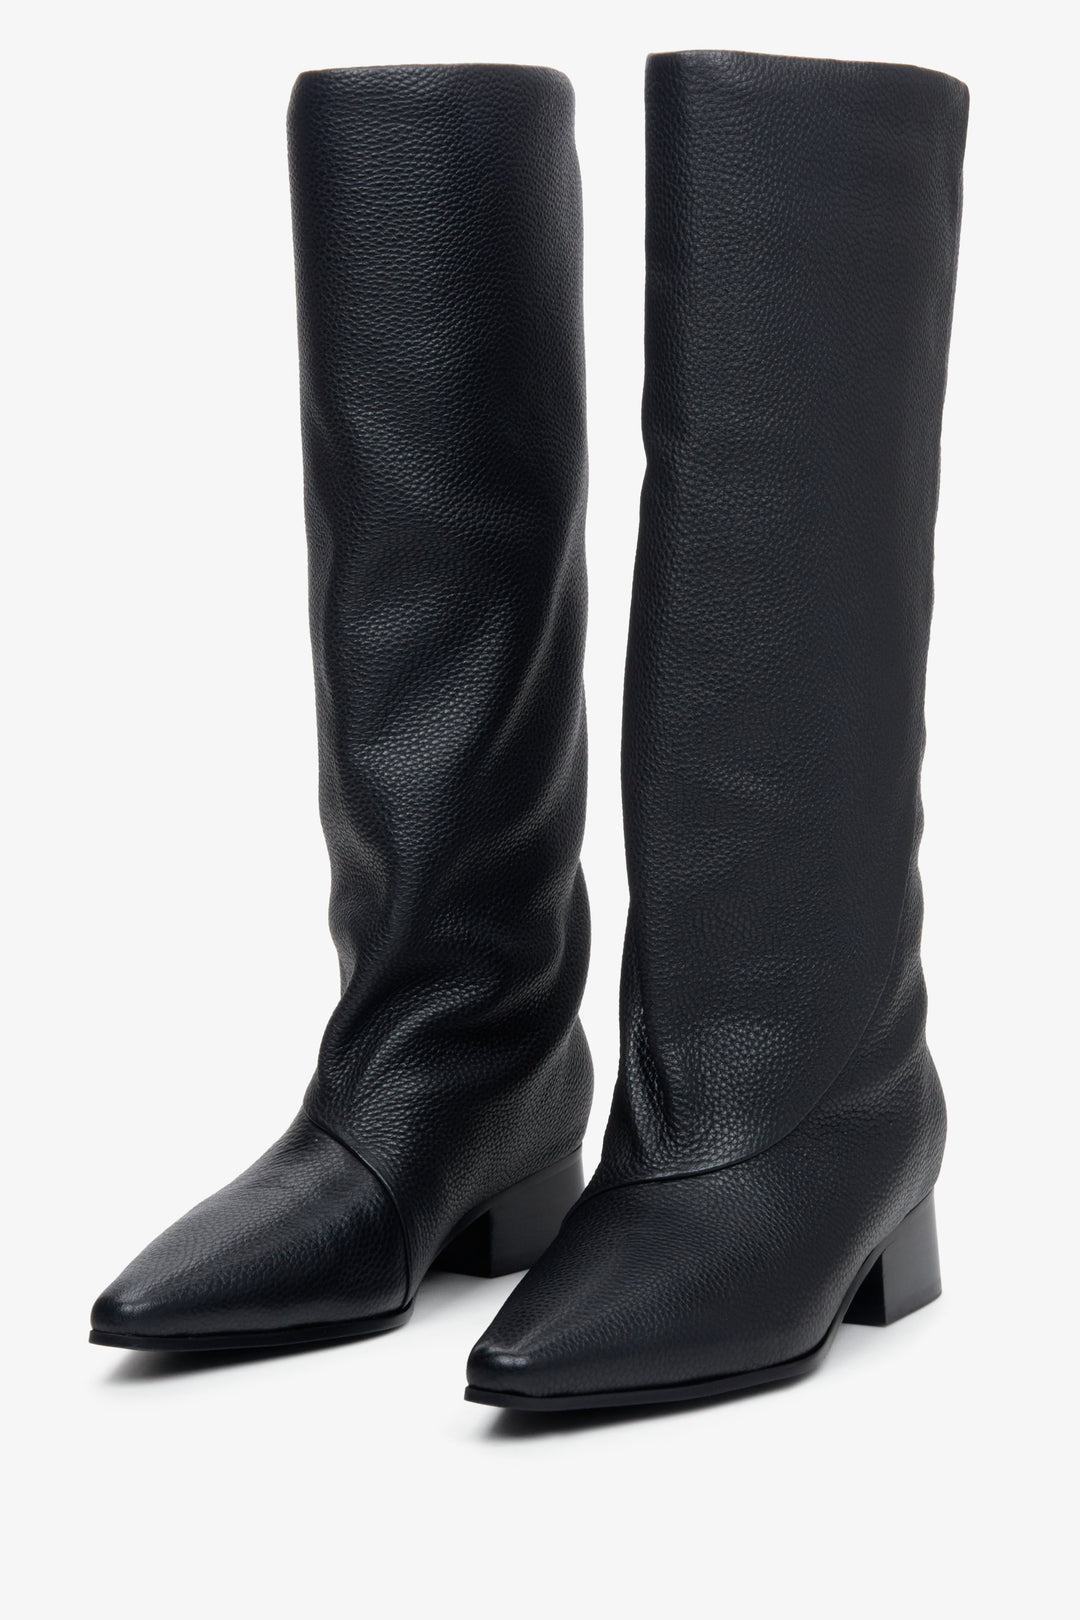 Women's black leather boots with a wide shaft by Estro.